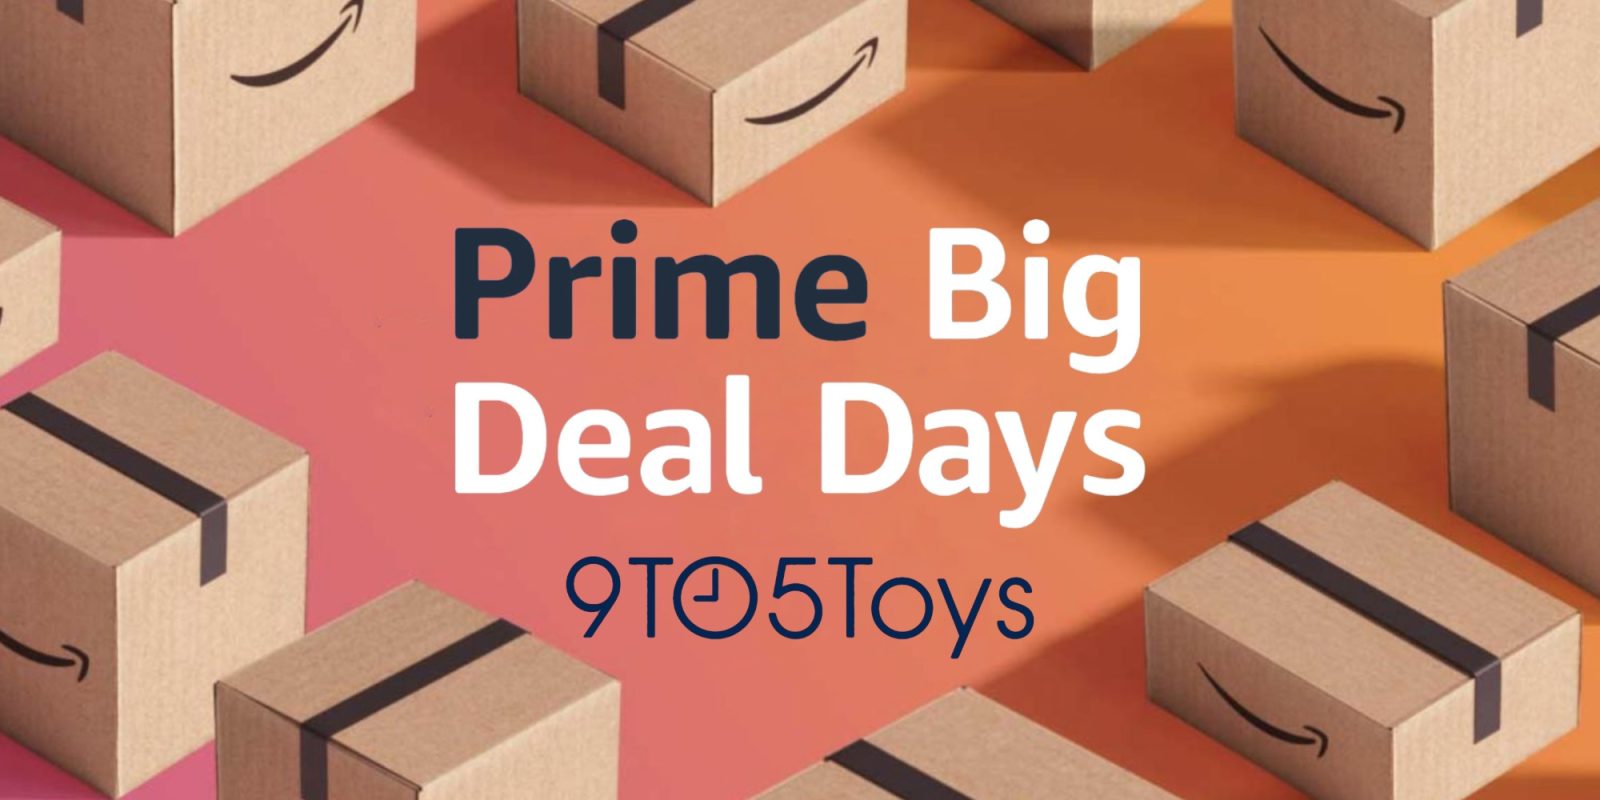 These Are the Best Deals to Shop During Prime Big Deal Days